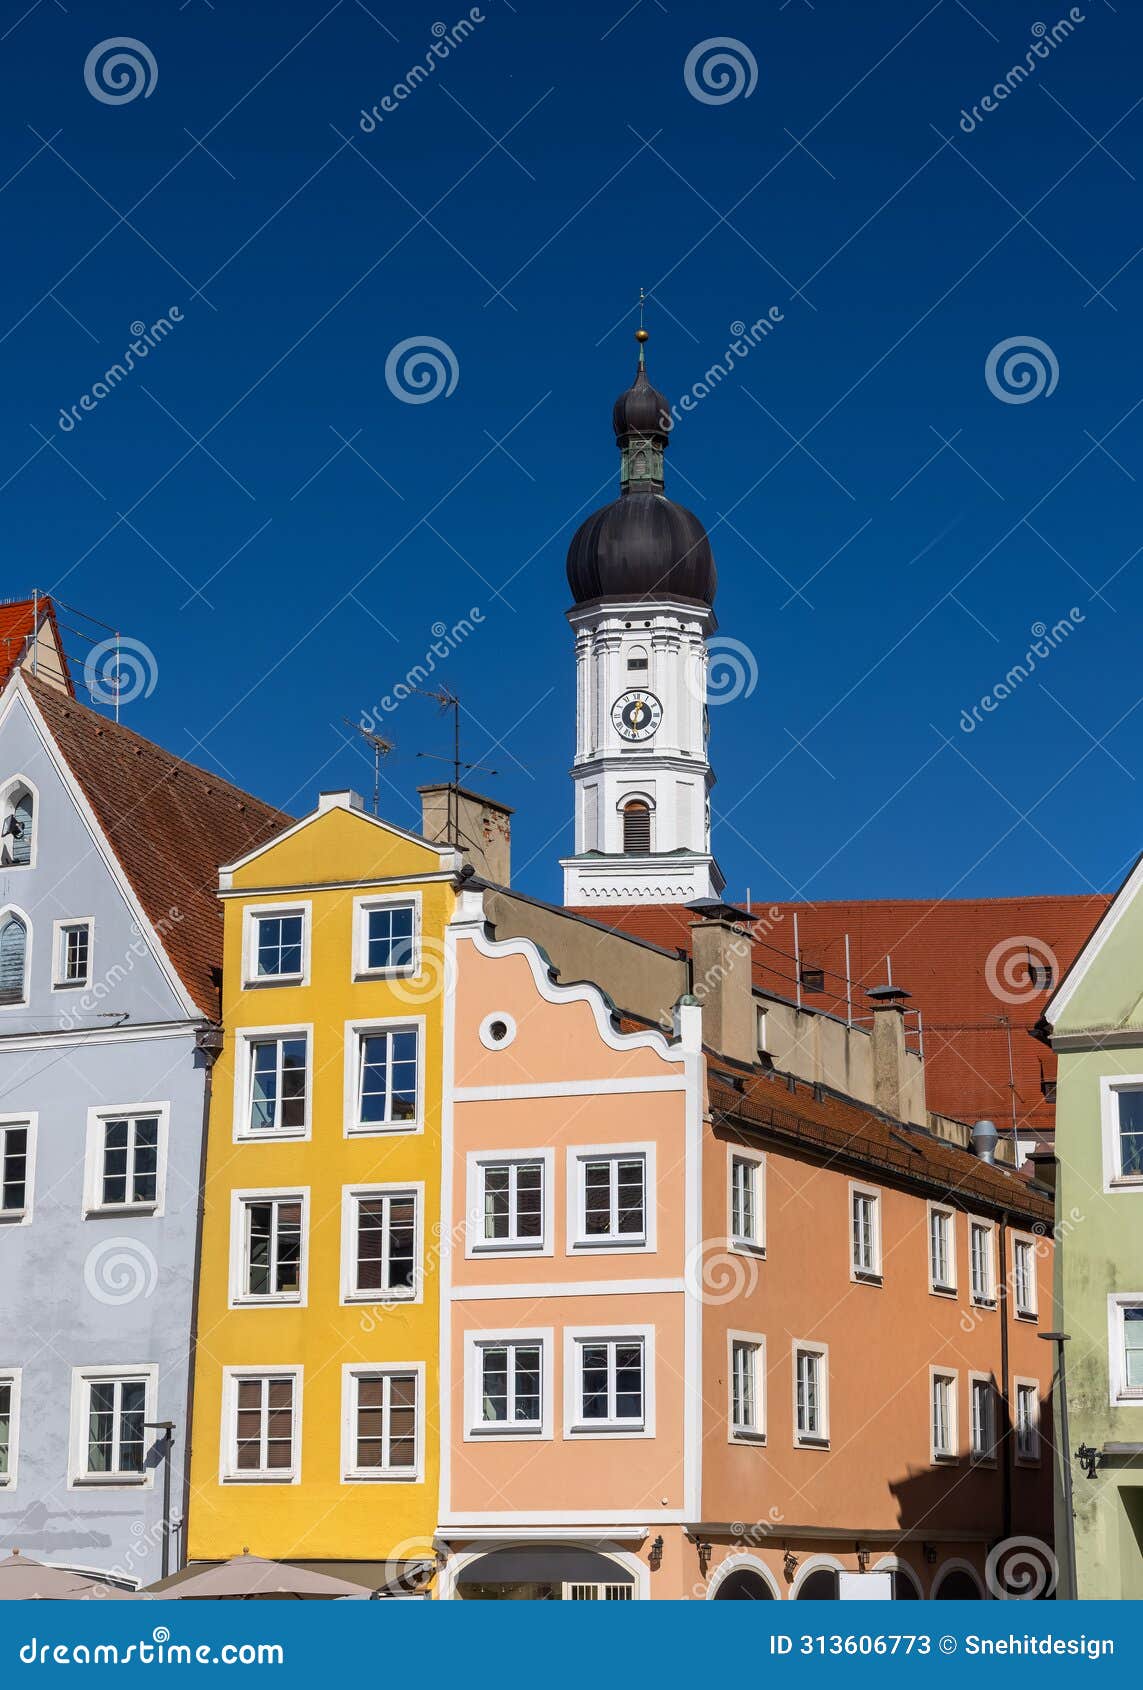 church of the assumption of mary and colorful buildings in landsberg city germany